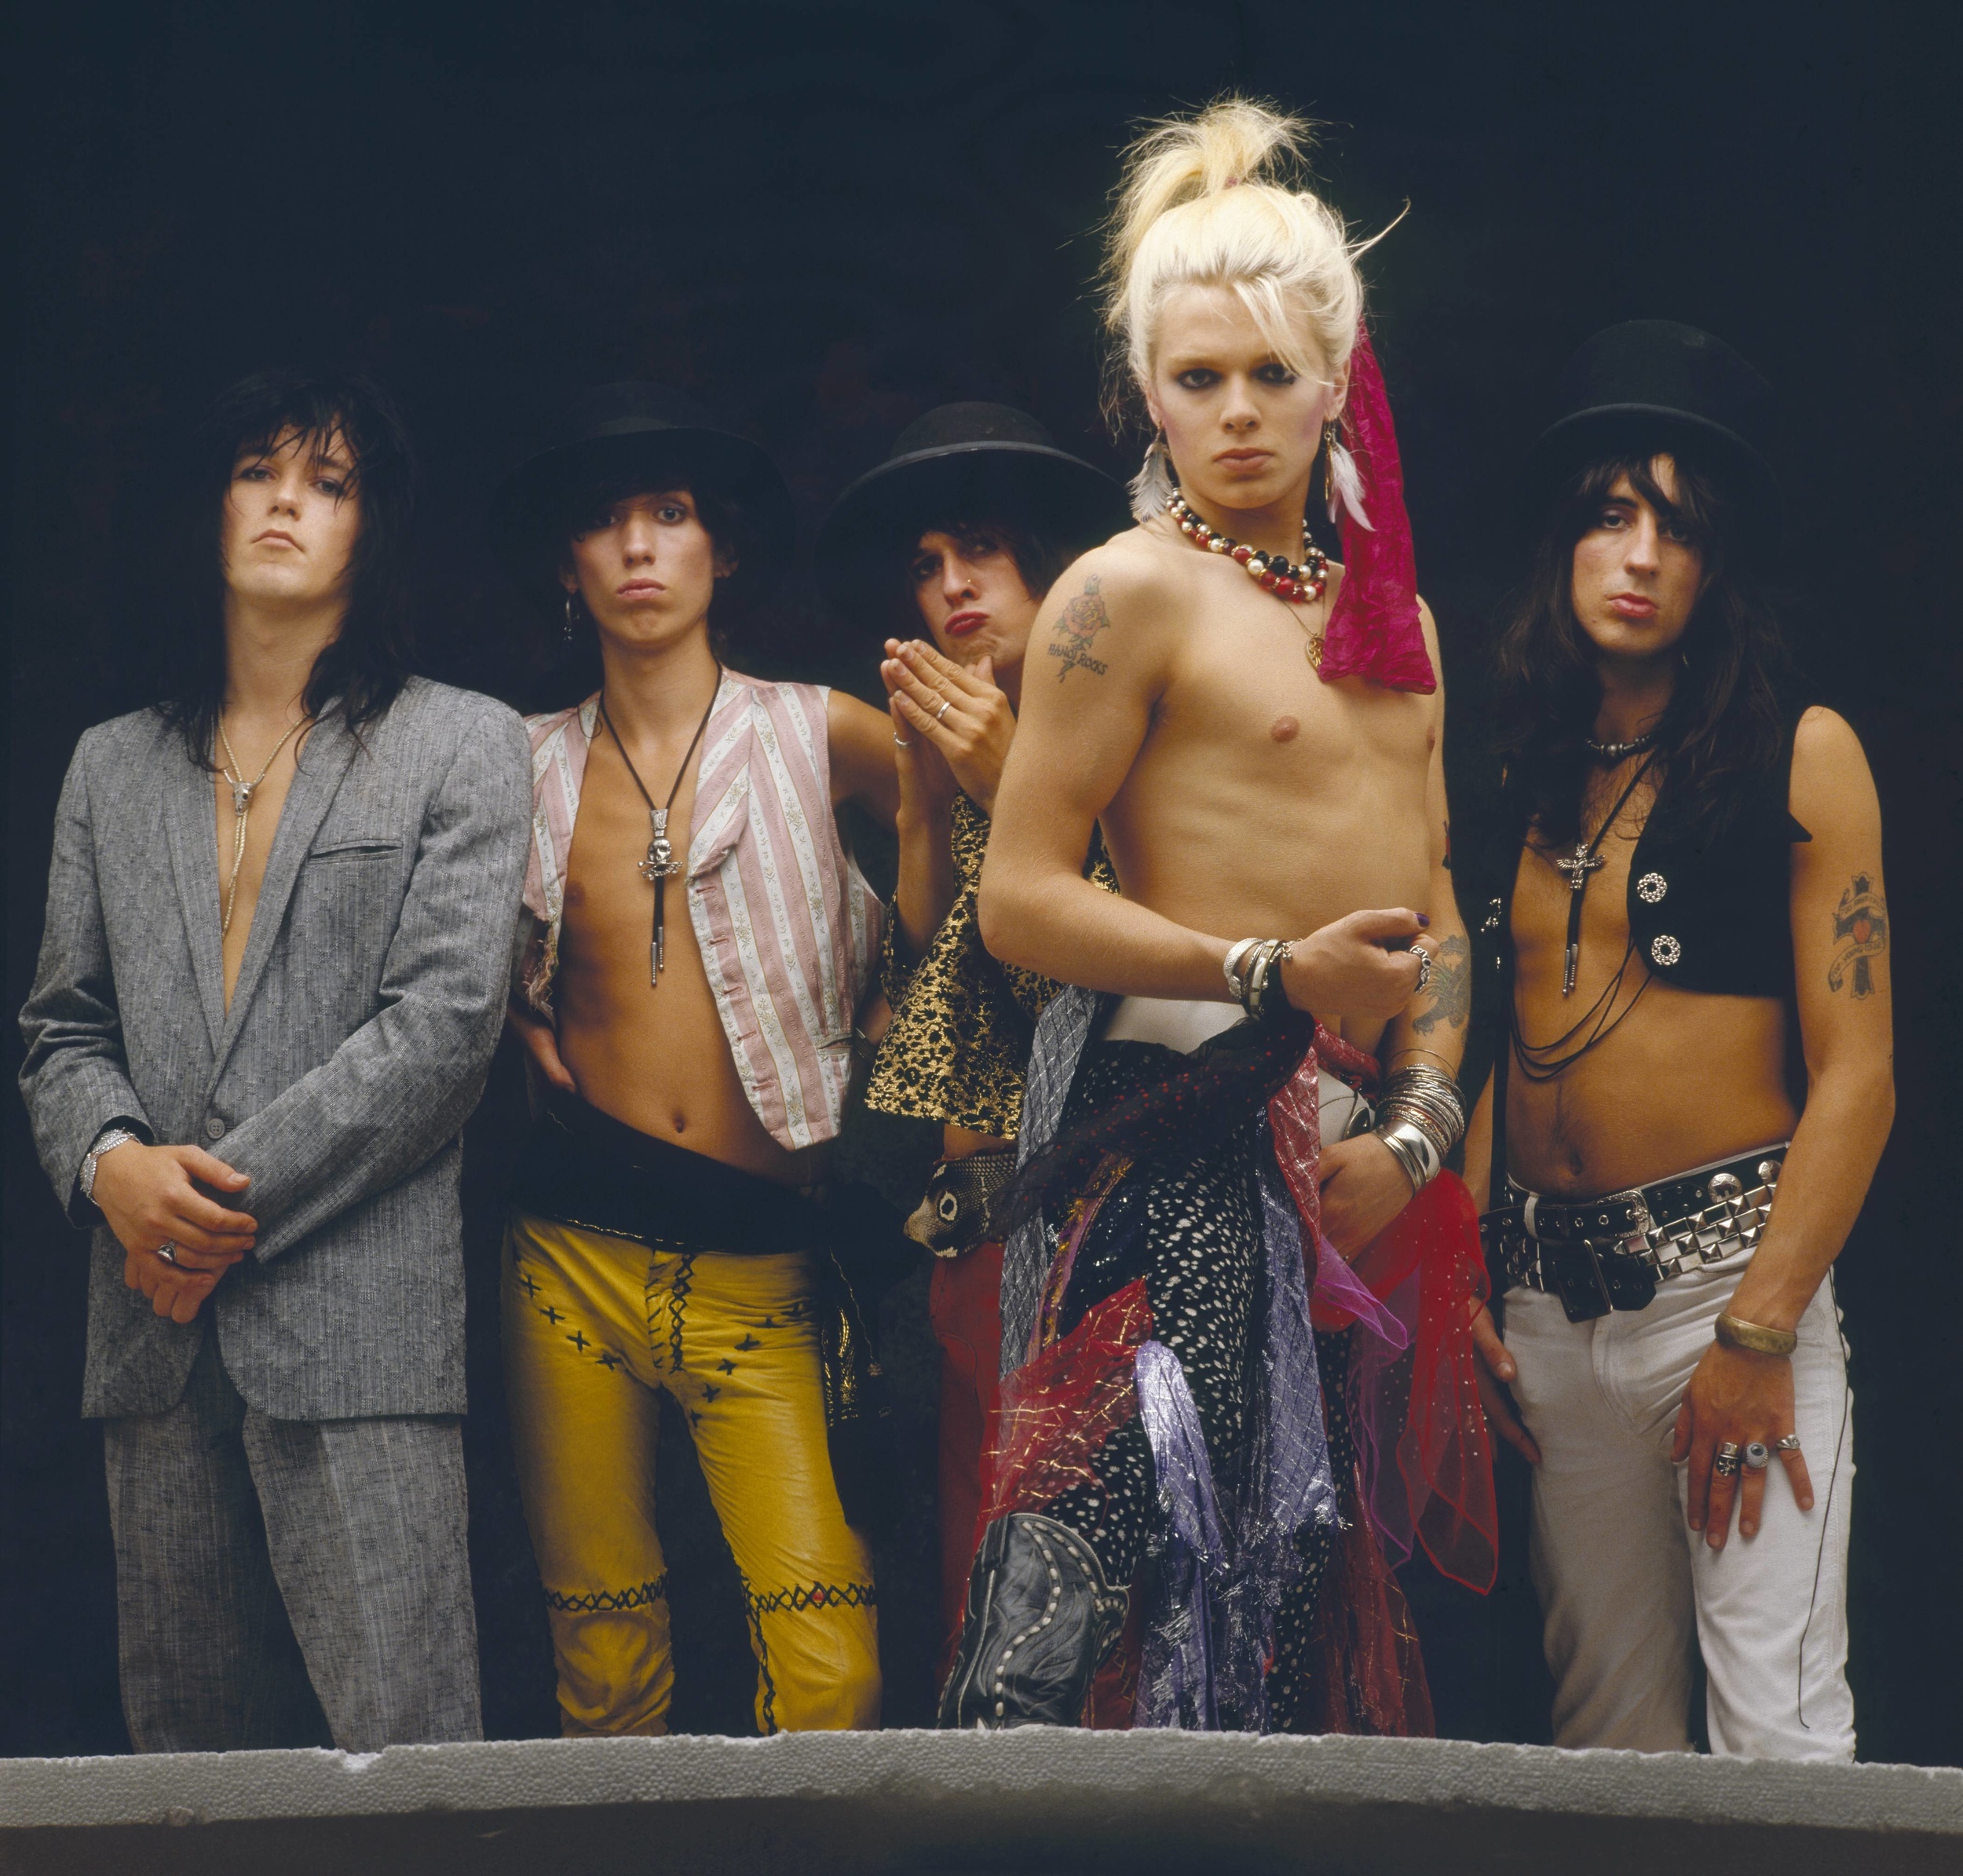 <p>Led by flamboyant frontman Michael Monroe, this late 1970s and early '80s Finnish outfit was much more successful in Europe and Japan than in the United States but has often been cited as a serious influence on more popular bands like Guns N' Roses and Poison. Hanoi Rocks achieved some modest U.S. success with its 1984 cover of the Creedence Clearwater Revival smash <a href="https://www.youtube.com/watch?v=dZQjRfQ5BPw" rel="noopener noreferrer">"Up Around the Bend<span>" </span></a><span>and the underrated </span><span><a href="https://www.youtube.com/watch?v=G9qHE9P8tHE" rel="noopener noreferrer">"Boulevard of Broken Dreams."</a> Unfortunately, the band is probably known most for </span><span><a href="https://www.loudersound.com/features/the-car-crash-that-killed-hanoi-rocks-razzle-vince-neil-never-apologised" rel="noopener noreferrer">drummer Nicholas "Razzle" Dingley's death in an automobile accident caused by</a> </span>Mötley Crüe lead singer Vince Neil in 1984.<span> That essentially ended the band's potential rise.</span></p><p><a href='https://www.msn.com/en-us/community/channel/vid-cj9pqbr0vn9in2b6ddcd8sfgpfq6x6utp44fssrv6mc2gtybw0us'>Follow us on MSN to see more of our exclusive entertainment content.</a></p>